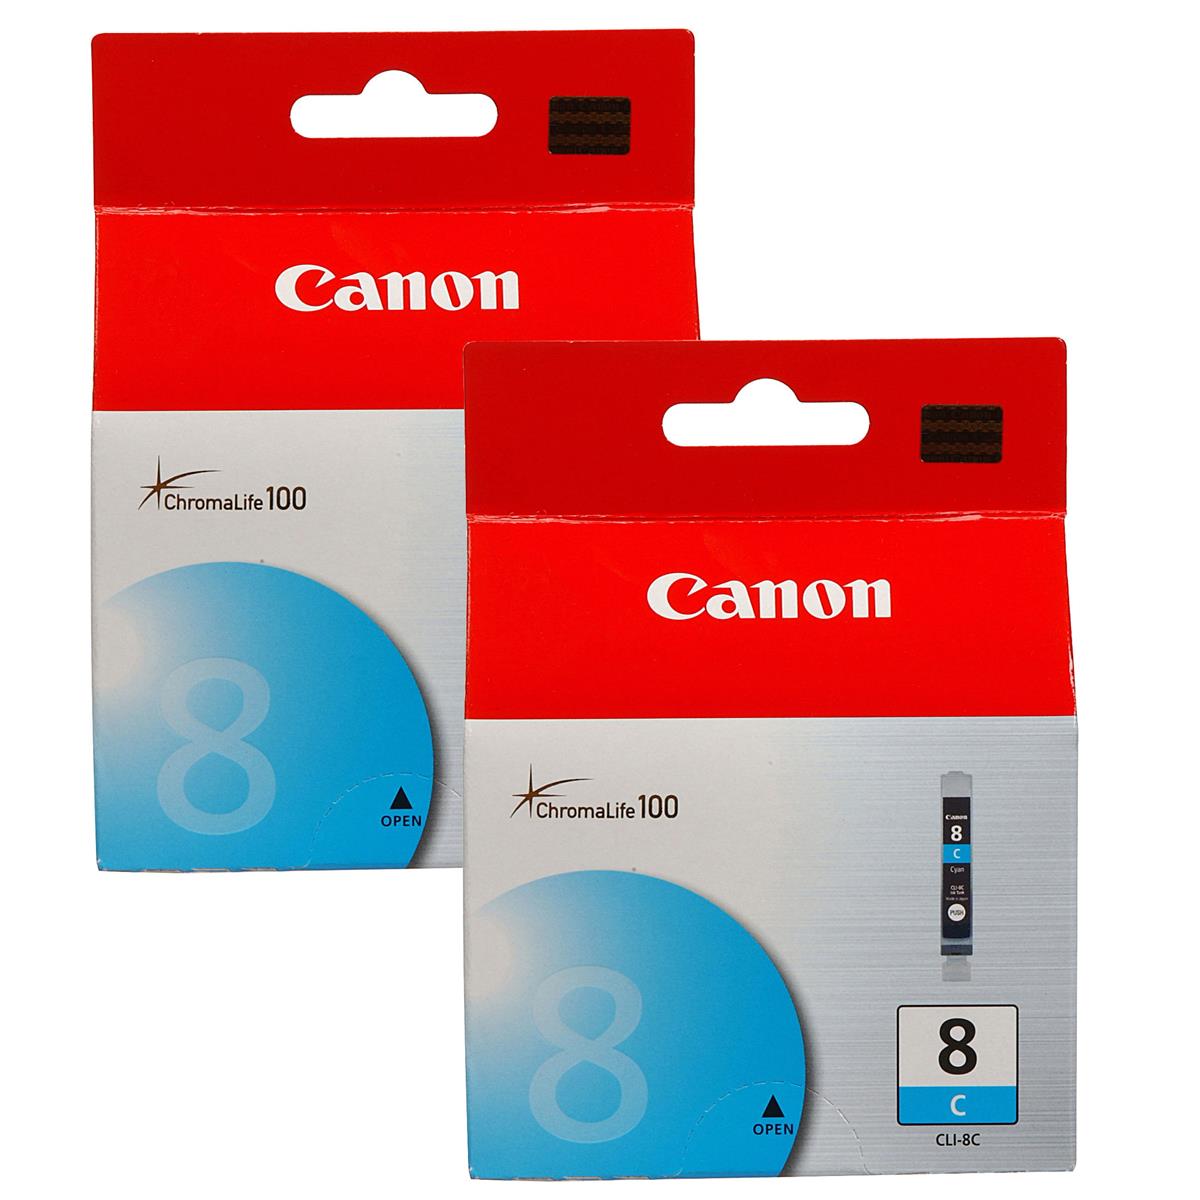 

Canon CLI-8C Cyan Ink Cartridge for the PIXMA iP, MP, MX and PRO Series, 2-Pack